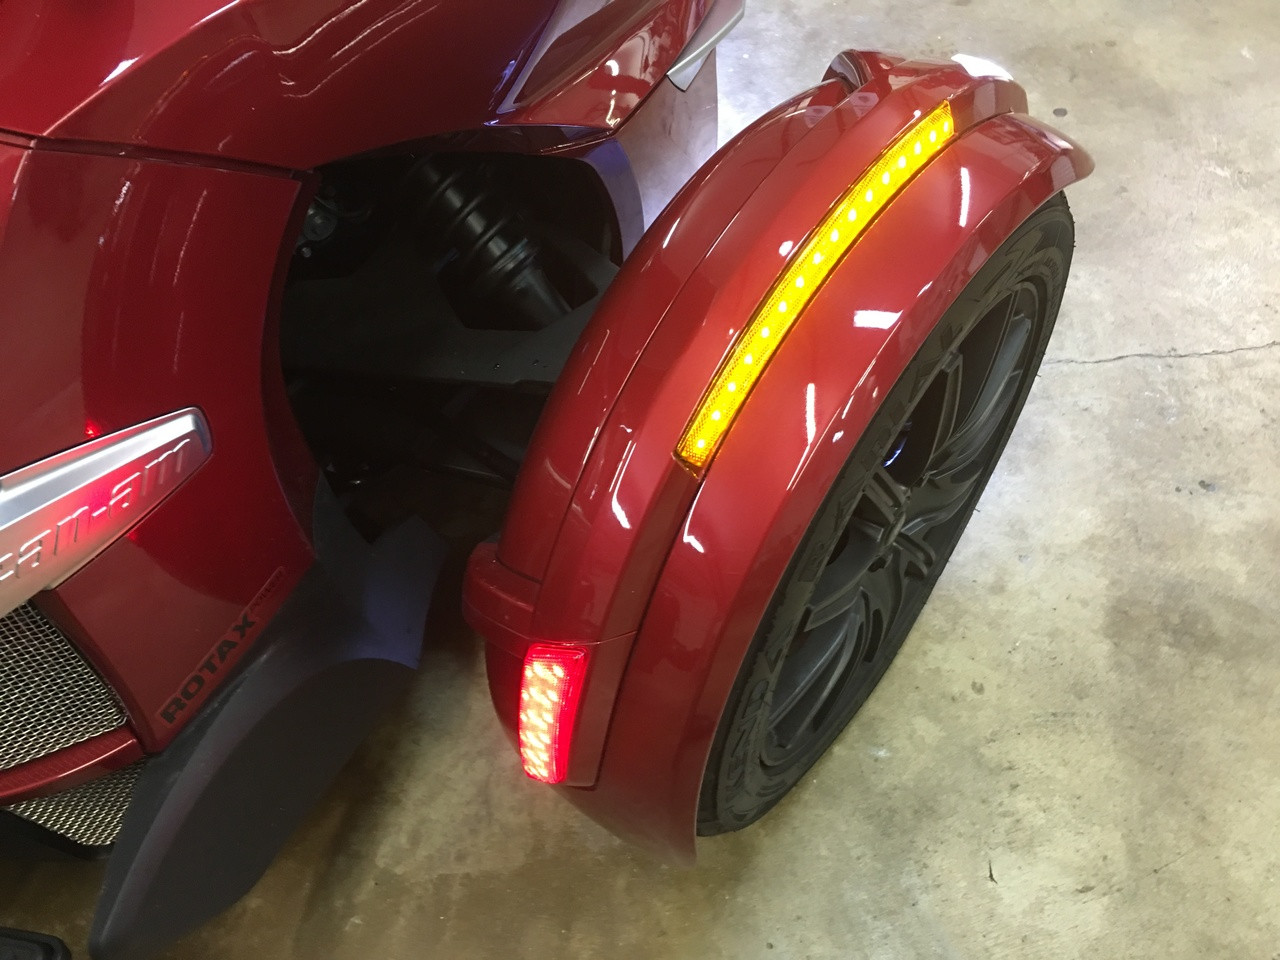 2013-2018 RT COMPLETE FRONT FENDER NEXT GEN LED REFLECTOR KIT BY SHOW CHROME. FITS ALL RT SPYDERS WITH THE NEW STYLE FENDERS INCLUDES CUSTOM PLUG AND PLAY WIRING HARNESS.(SPY224)